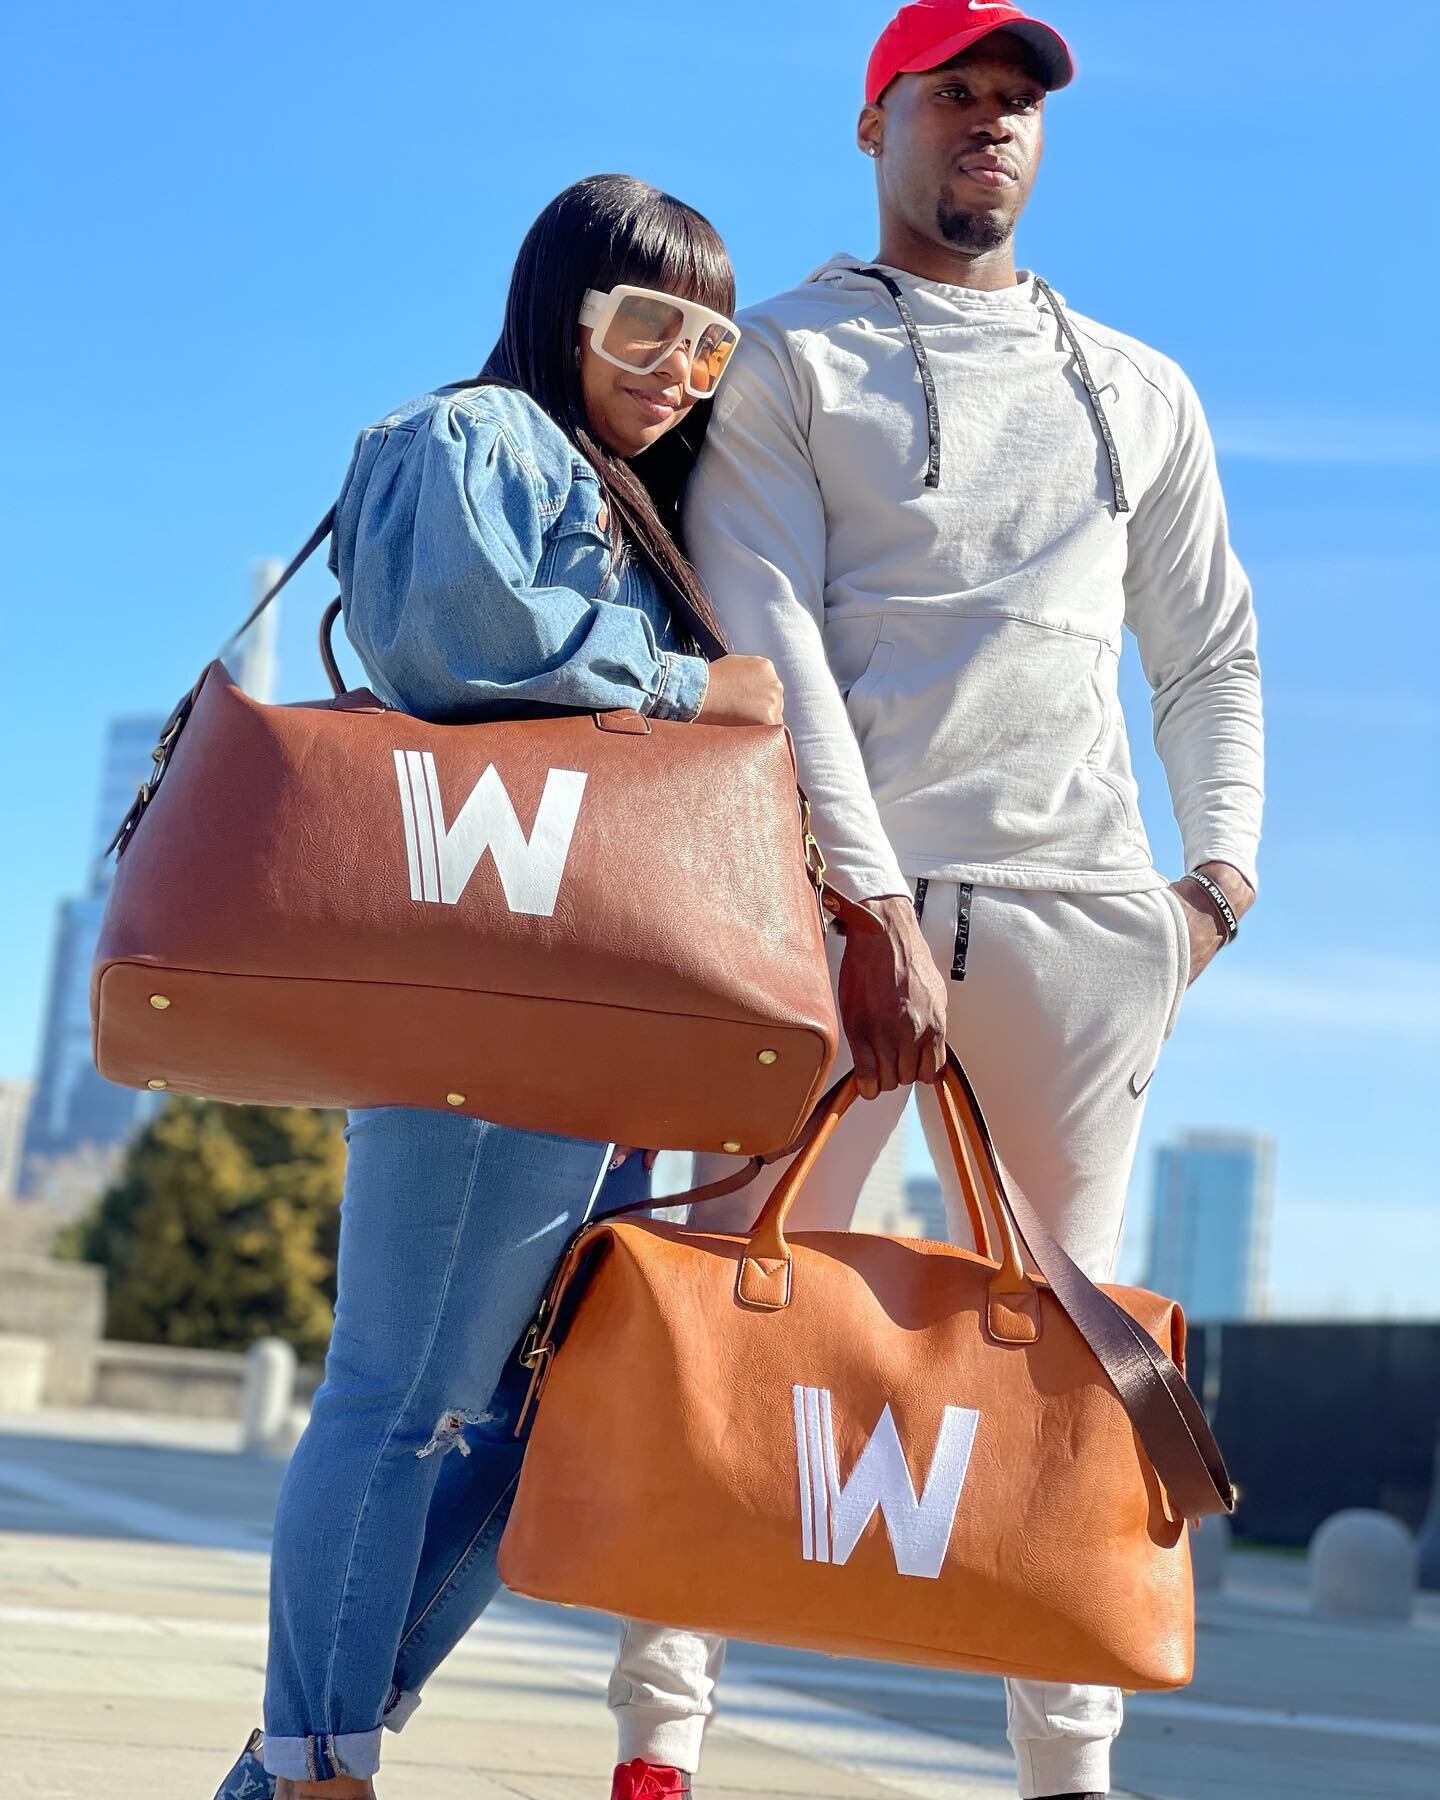 The Weekender Essentials 3-Day Duffle is the ideal bag for the experienced or novice traveler. With its volume maximizing design, geared towards packing three full days of clothes, shoes, and accessories, this bag gets the job done. 

Designed to add